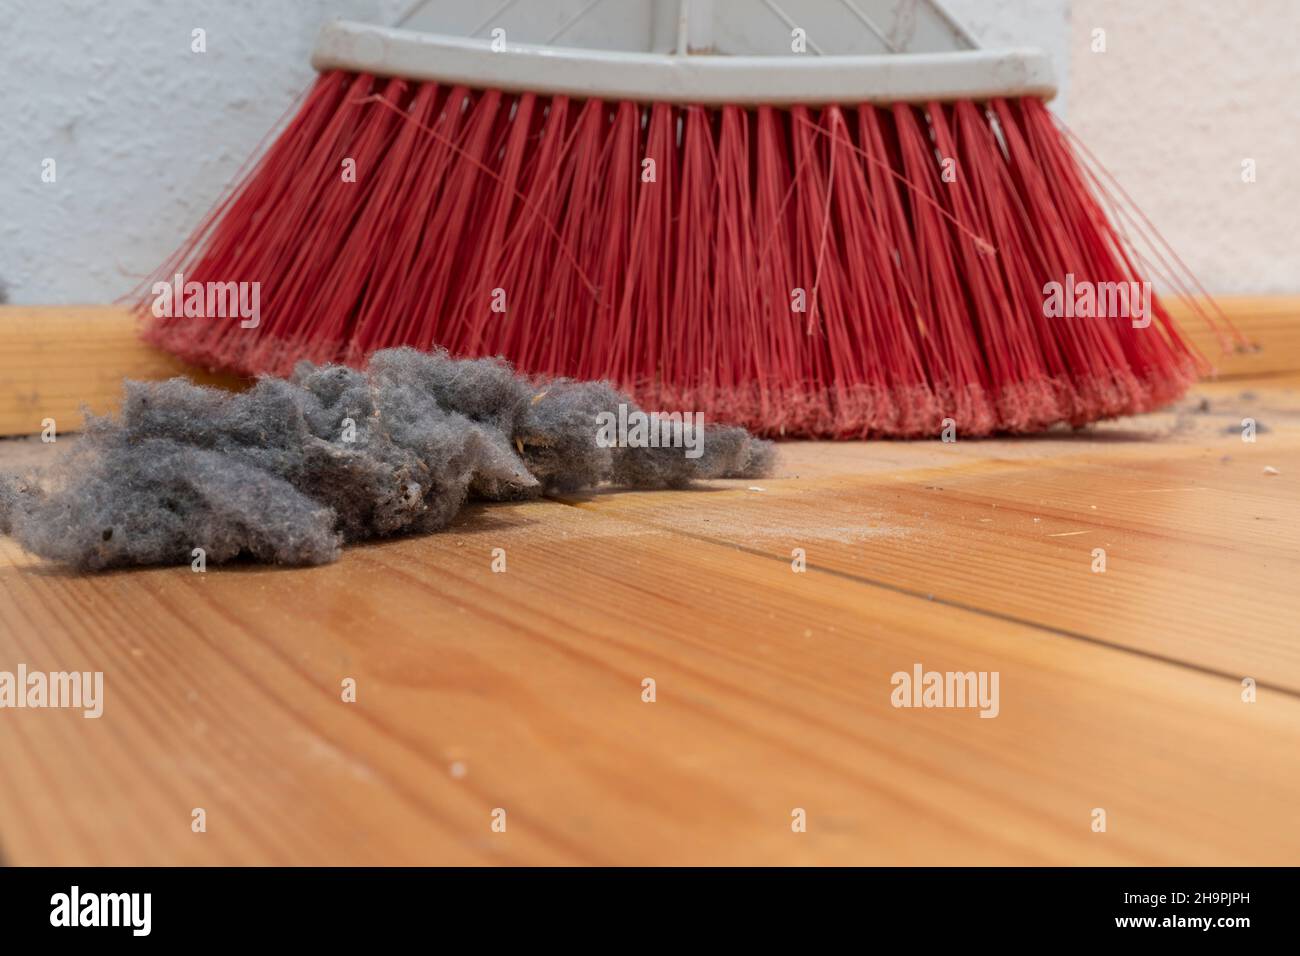 Sweeping dust with red broom on a wooden floor Stock Photo